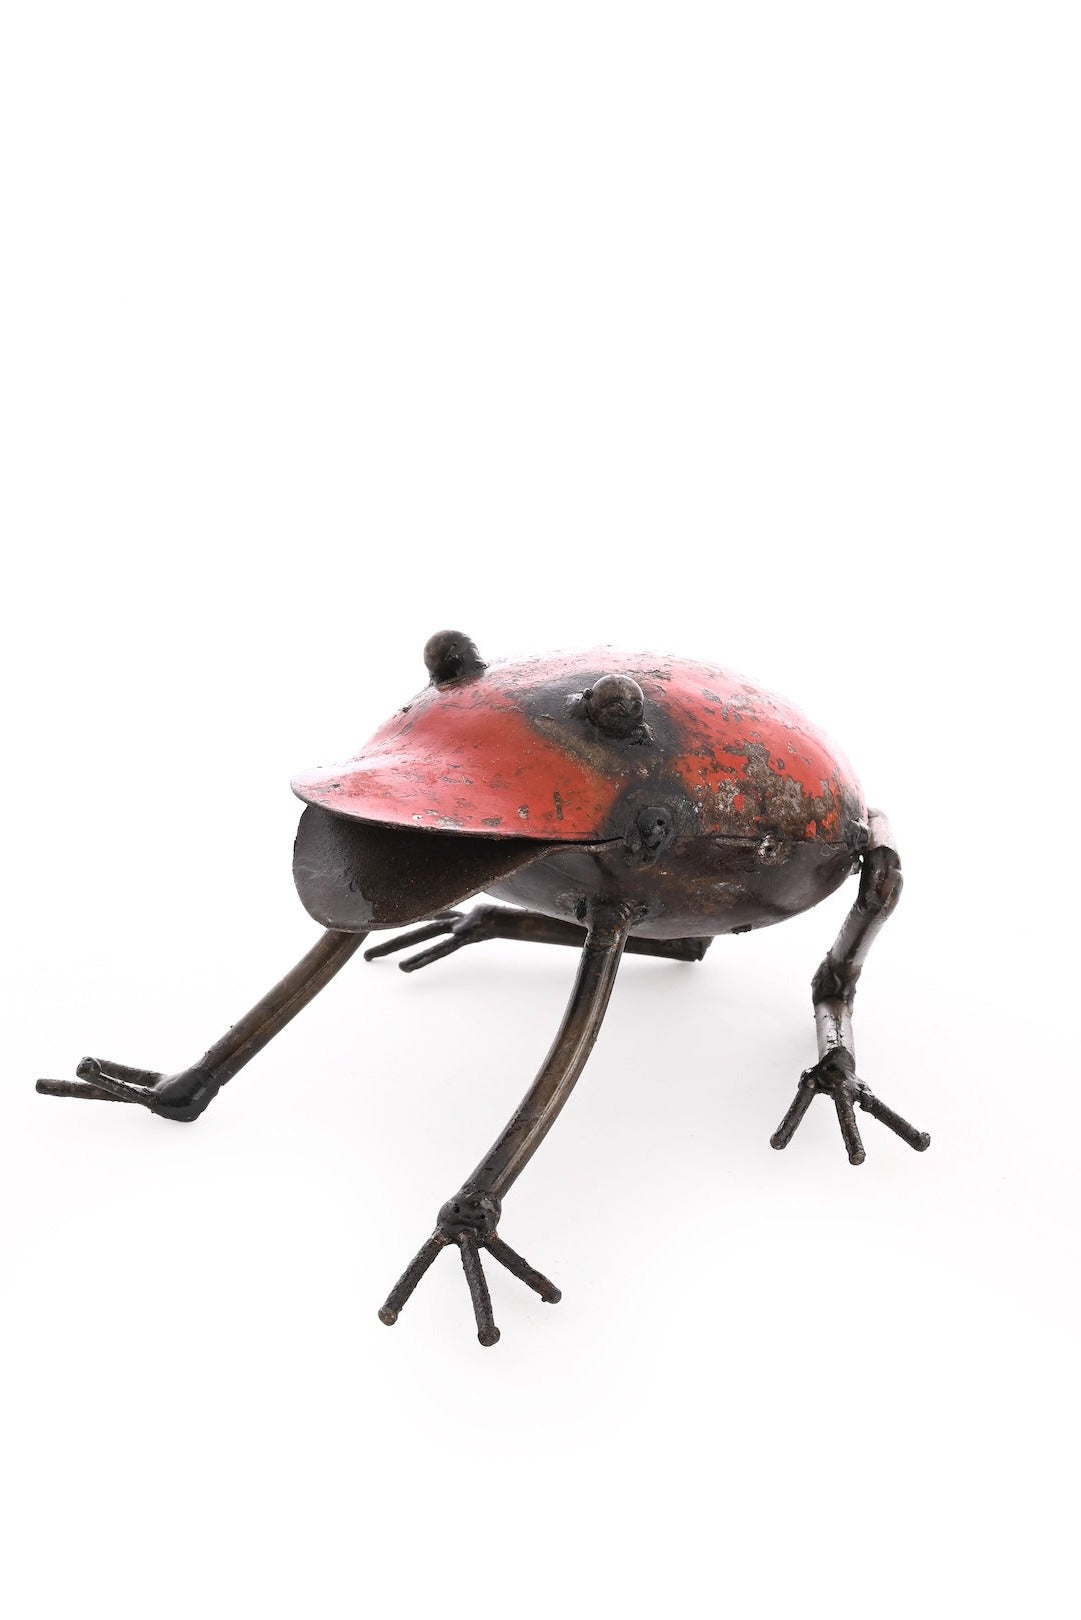 Recycled Oil Drum Frog - Red